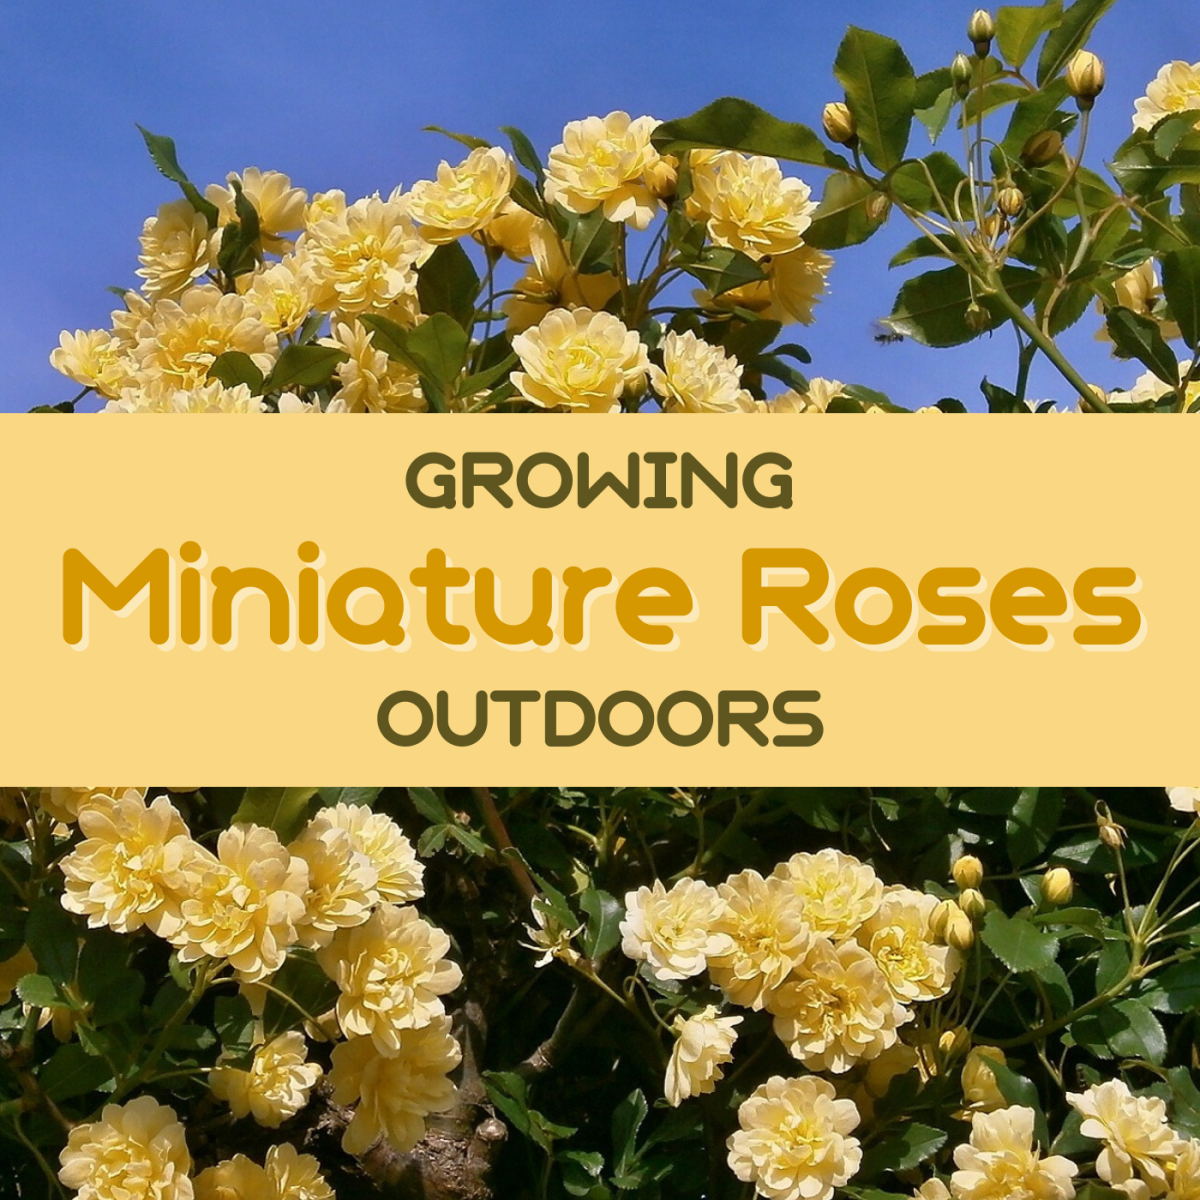 You can plant and successfully grow mini roses both inside and outside. Learn how to care for your outdoor blooms.